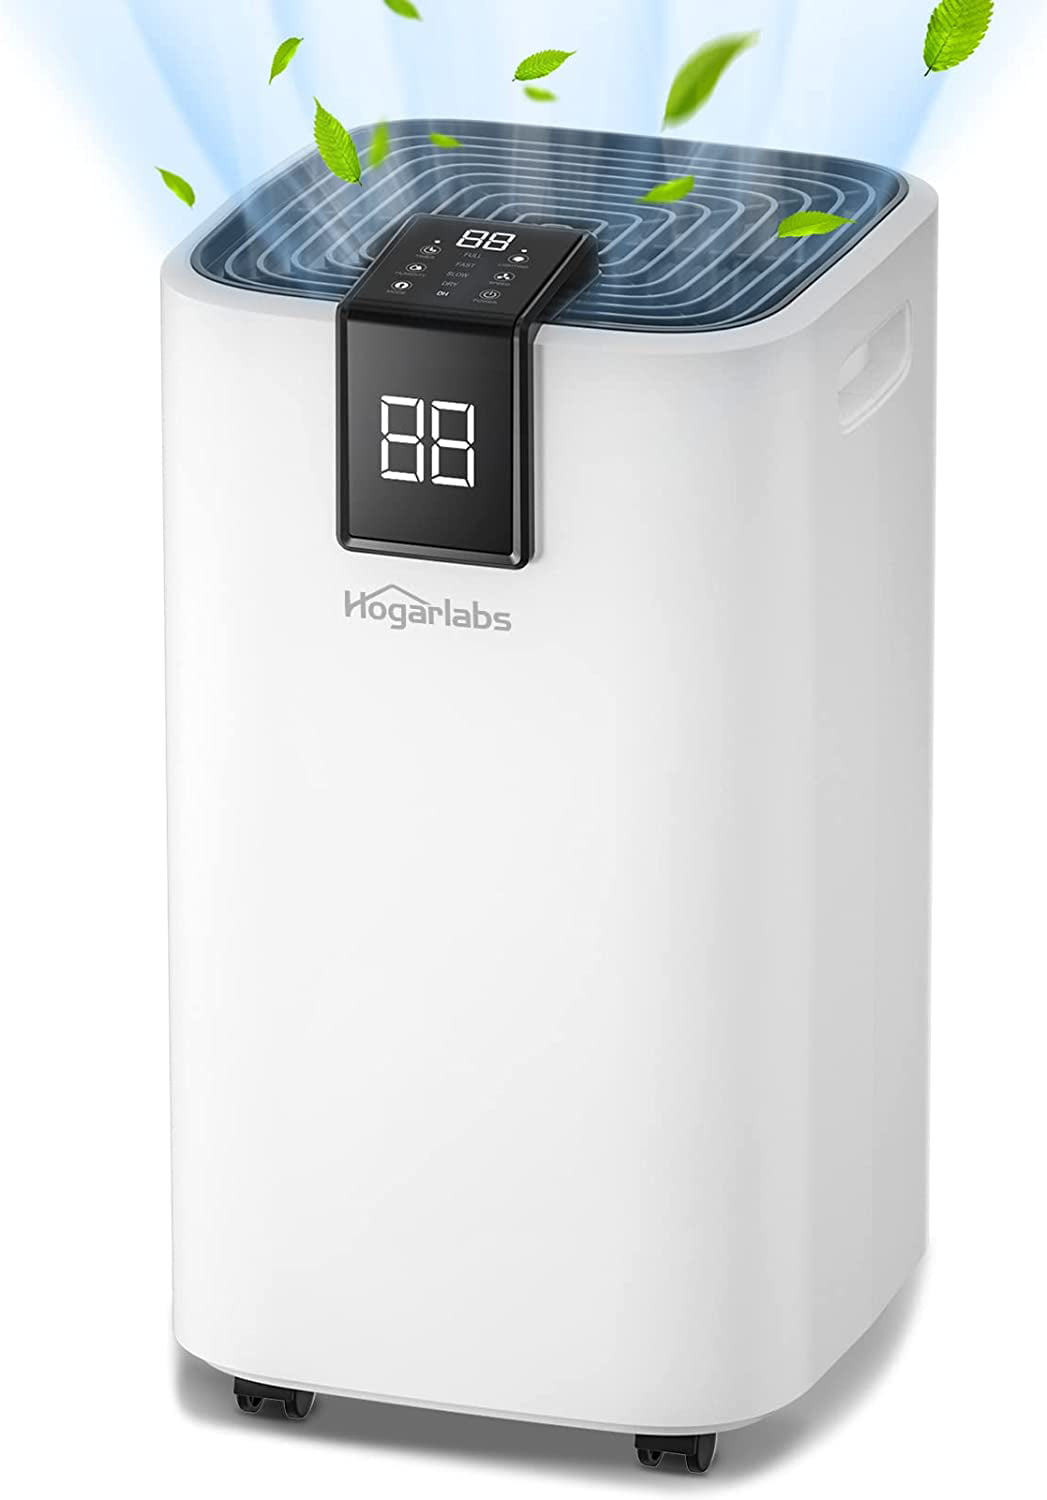 wakker worden Roman Wedstrijd SWJYH 4500 Sq. Ft Dehumidifier for Basements,Home and Large Room,70 Pint  with Drain Hose and Wheels,Intelligent Humidity Control,Laundry Dry, Auto  Defrost,24H Timer,Automatic Drain - Walmart.com